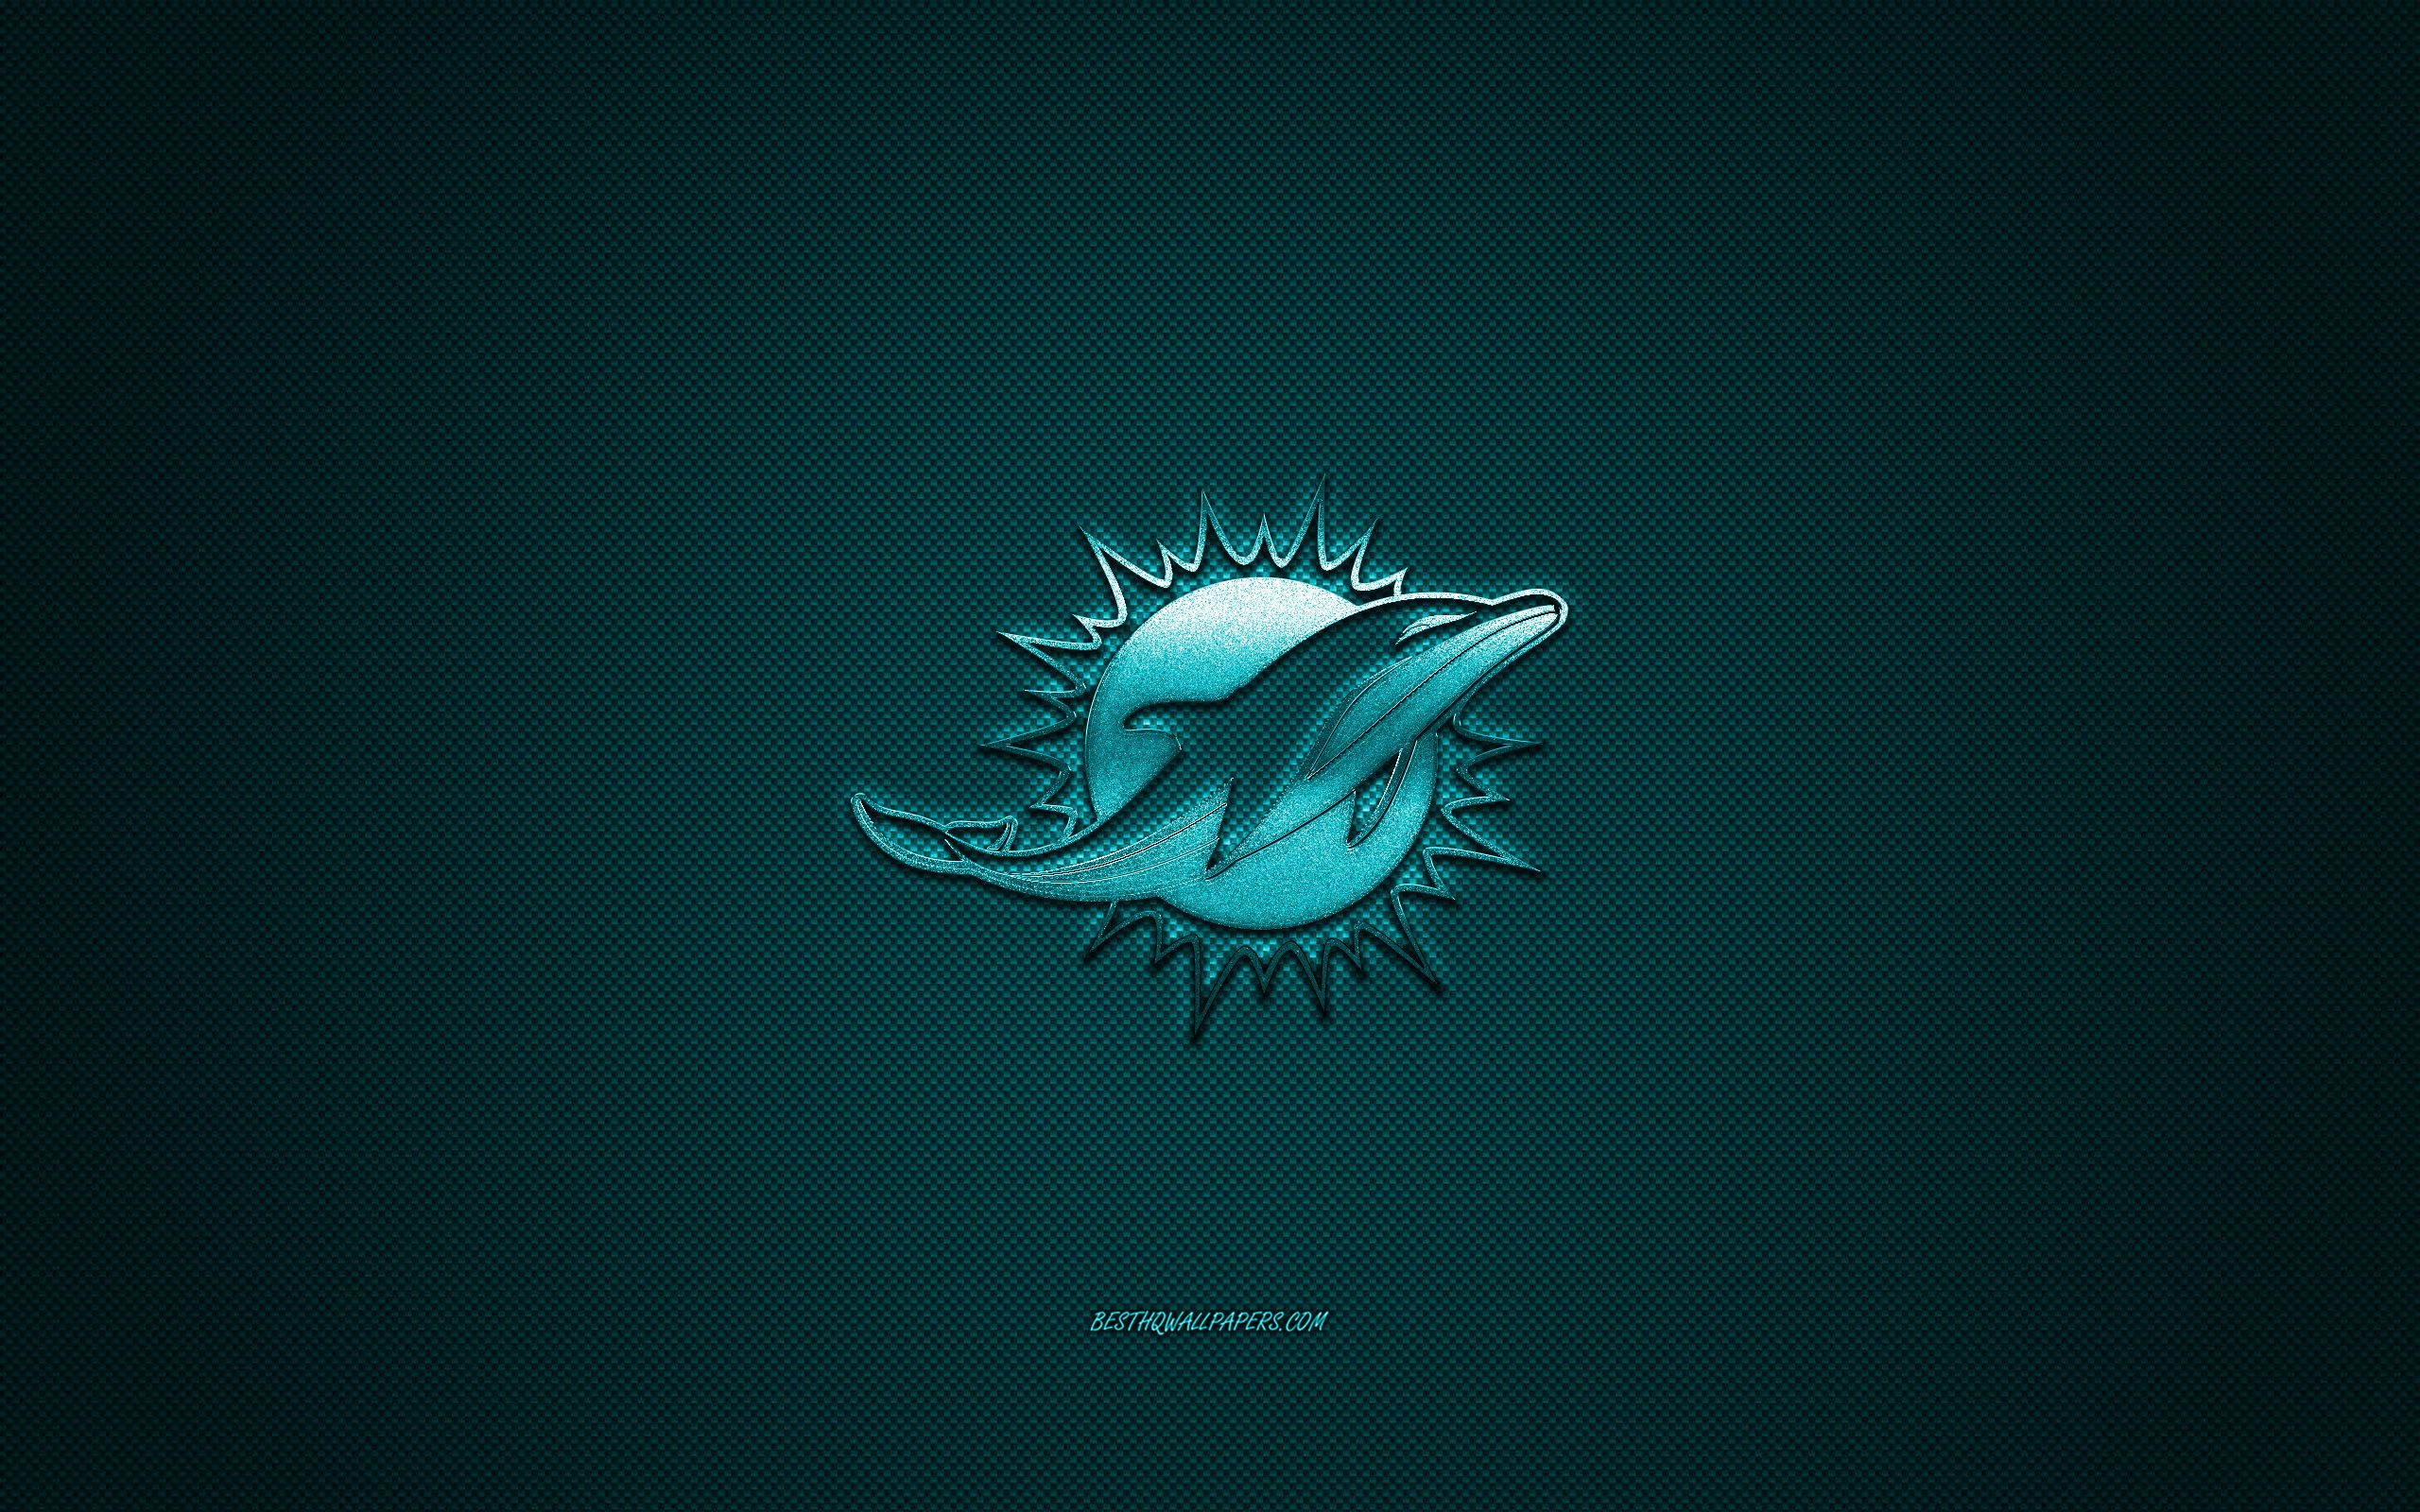 Miami Dolphins Wallpapers • TrumpWallpapers